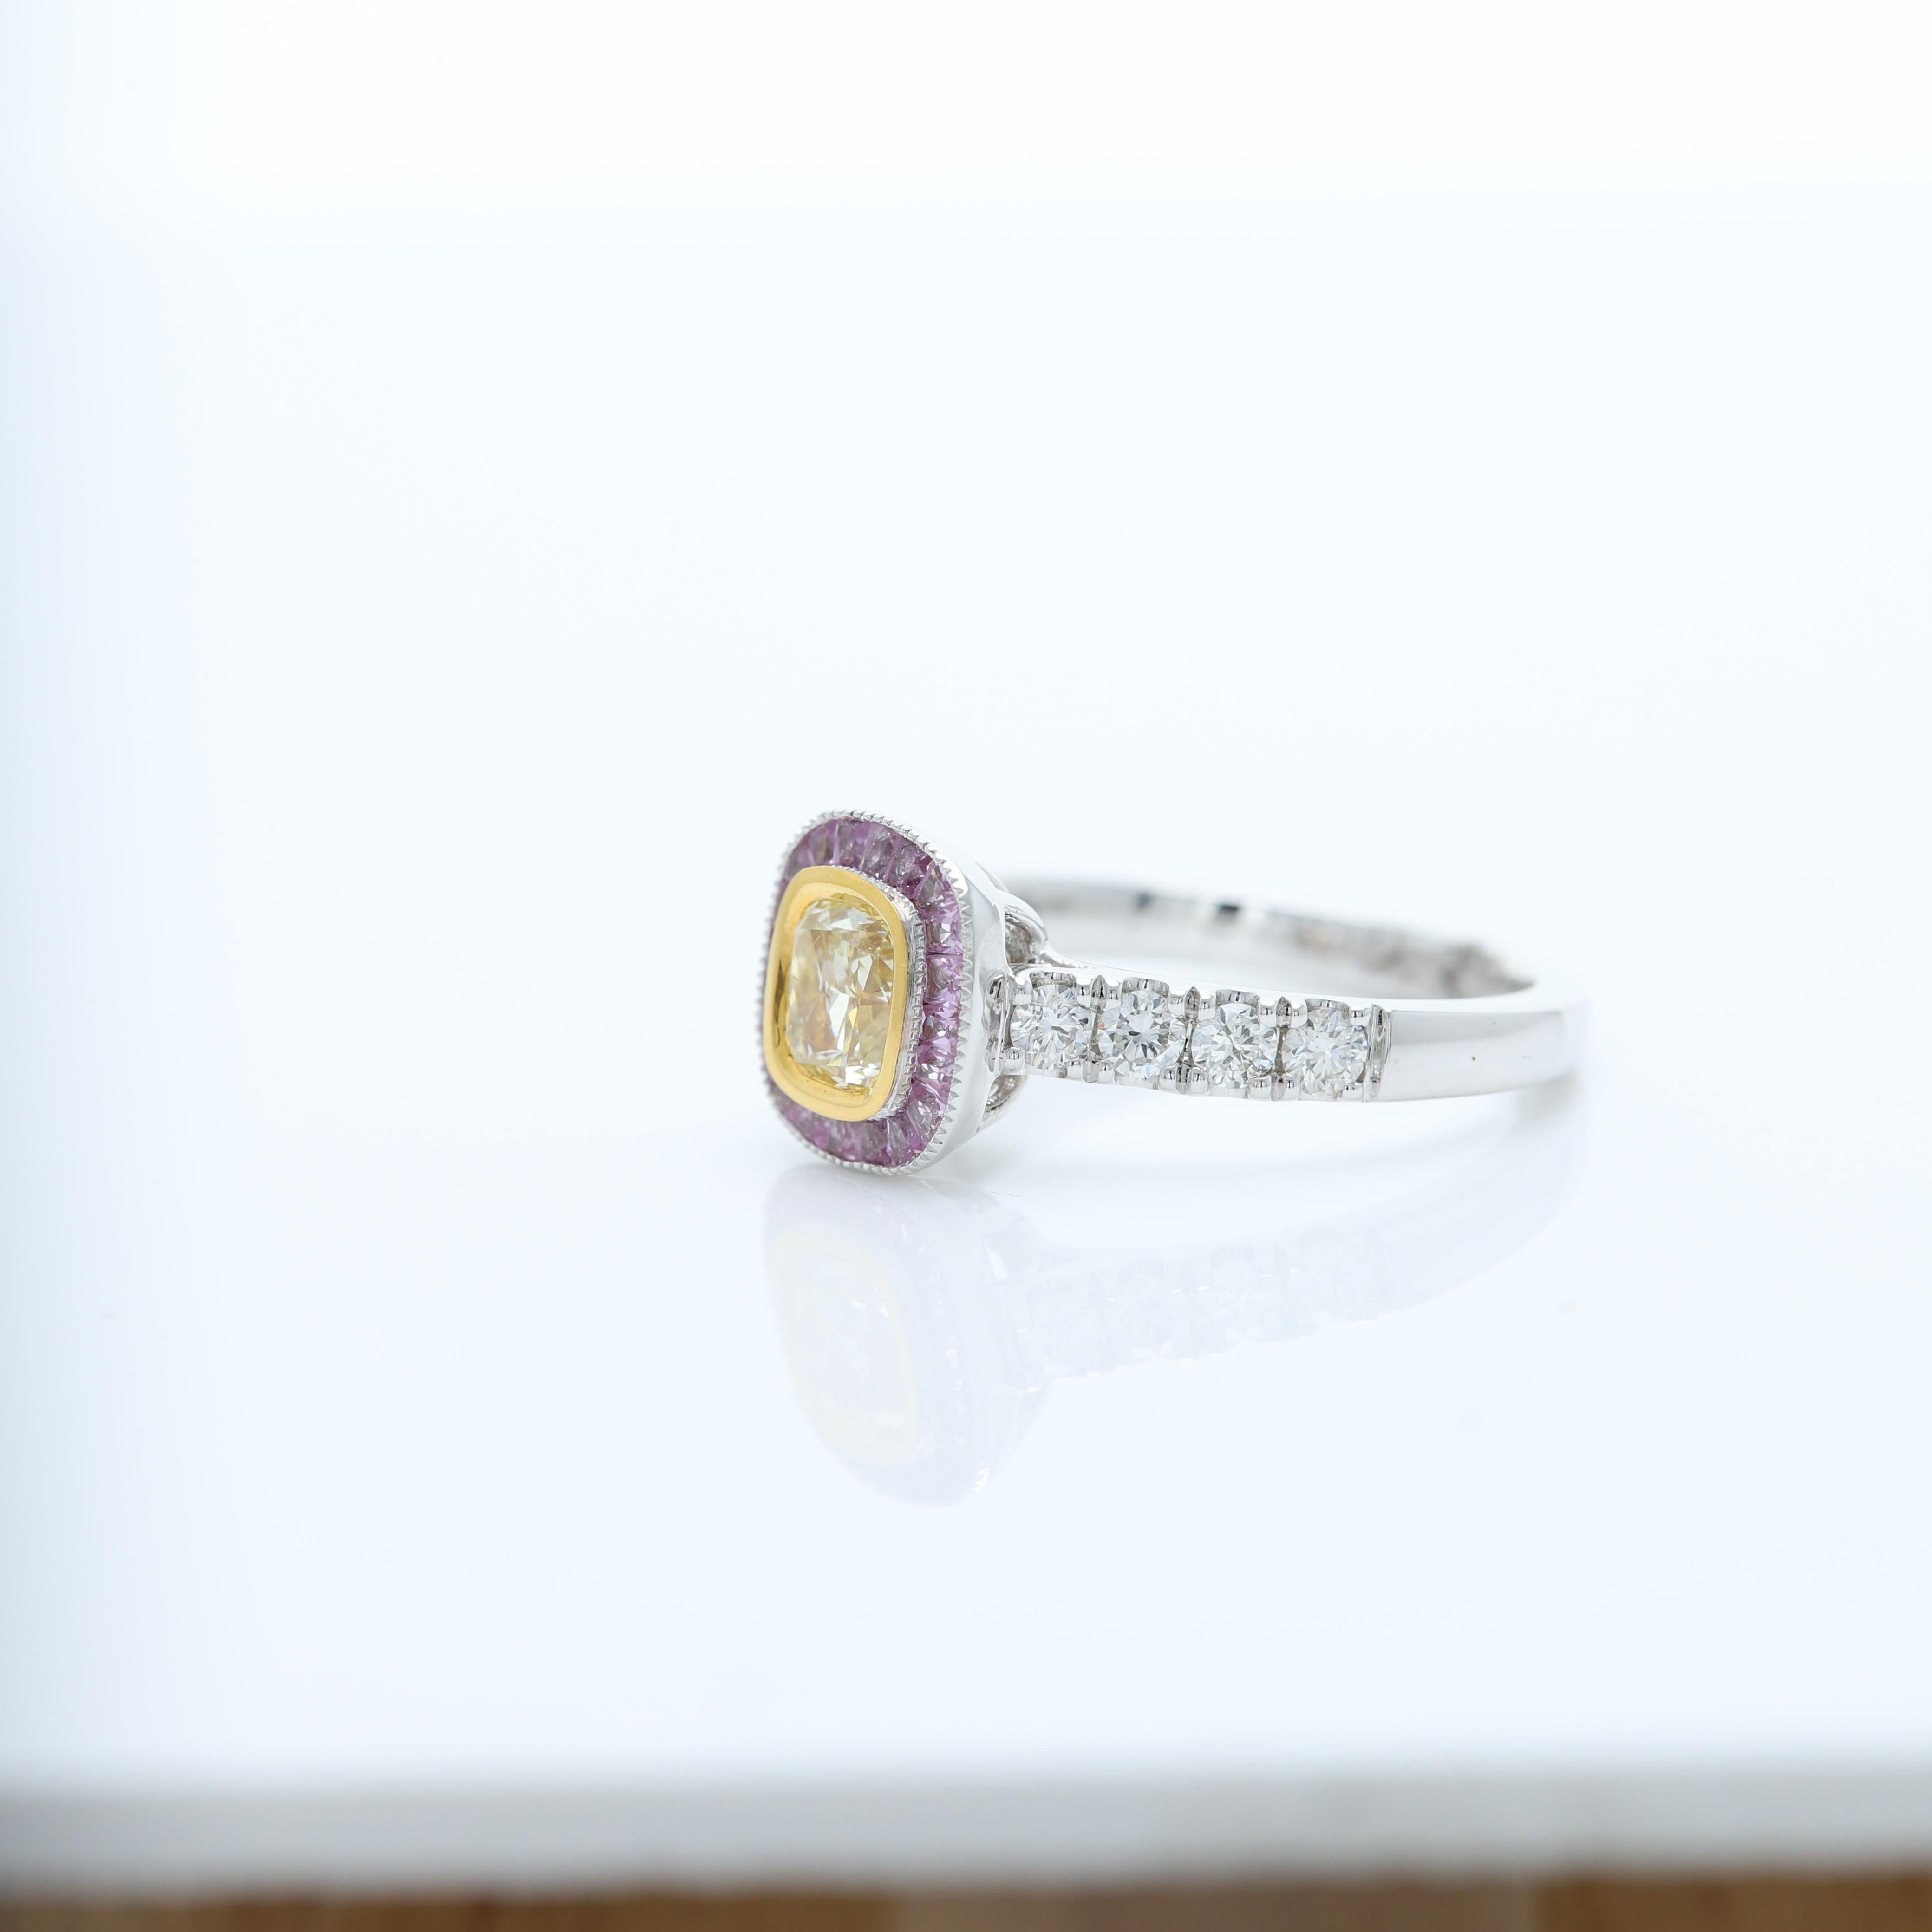 Art Deco Style Colorful Ring
Center is Yellow Diamond surrounded with Purple Sapphire, sides have regular white Diamonds
All stones are Natural
18k Two Tone Gold 
Yellow Diamond size - 0.70 carat (5x6 mm)
Small Diamonds 0.43 carat
Purple Sapphire